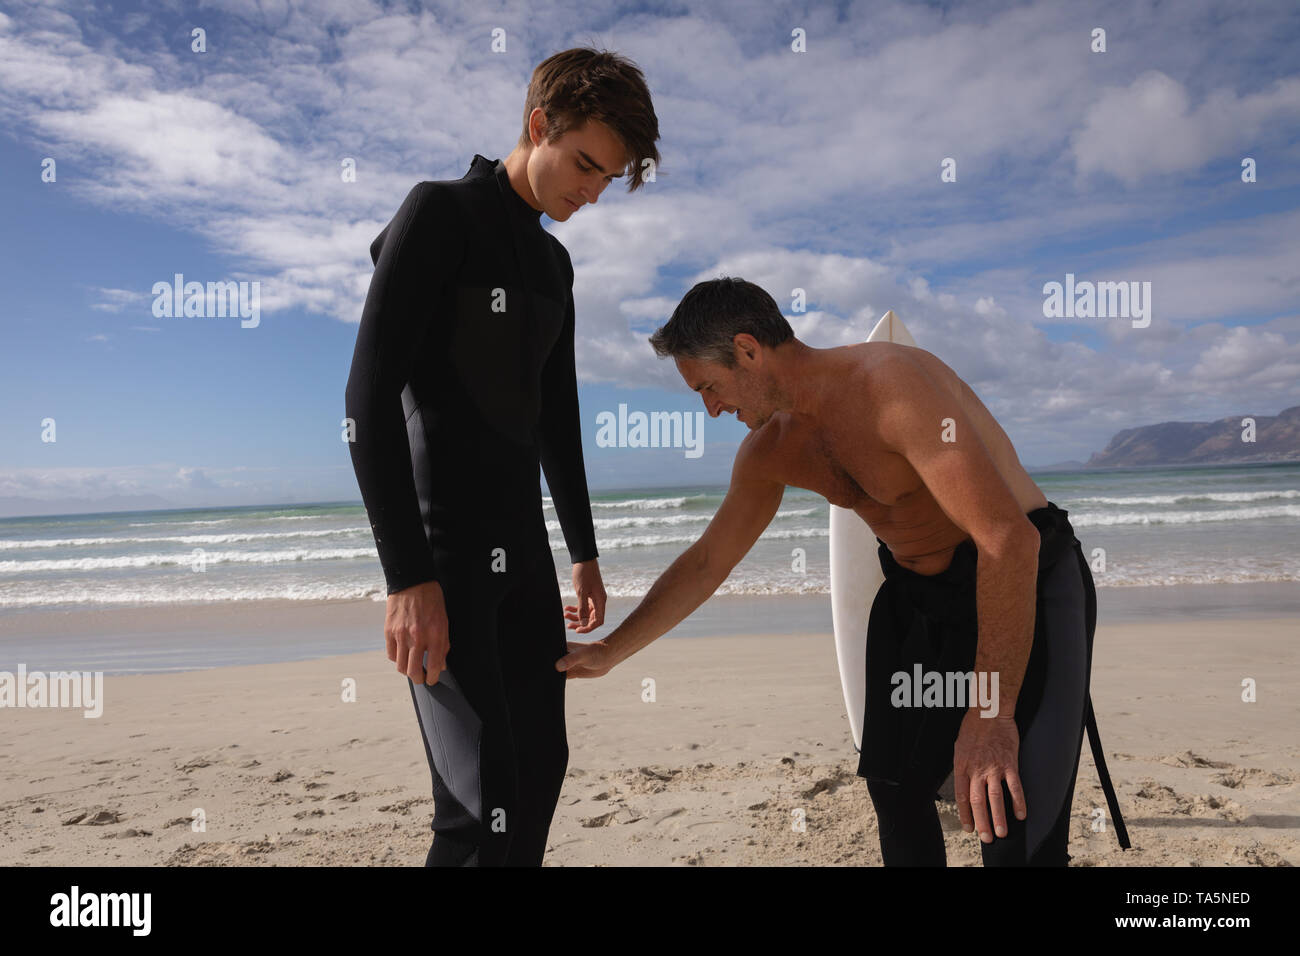 Father assist son to ride surfboard at beach Stock Photo